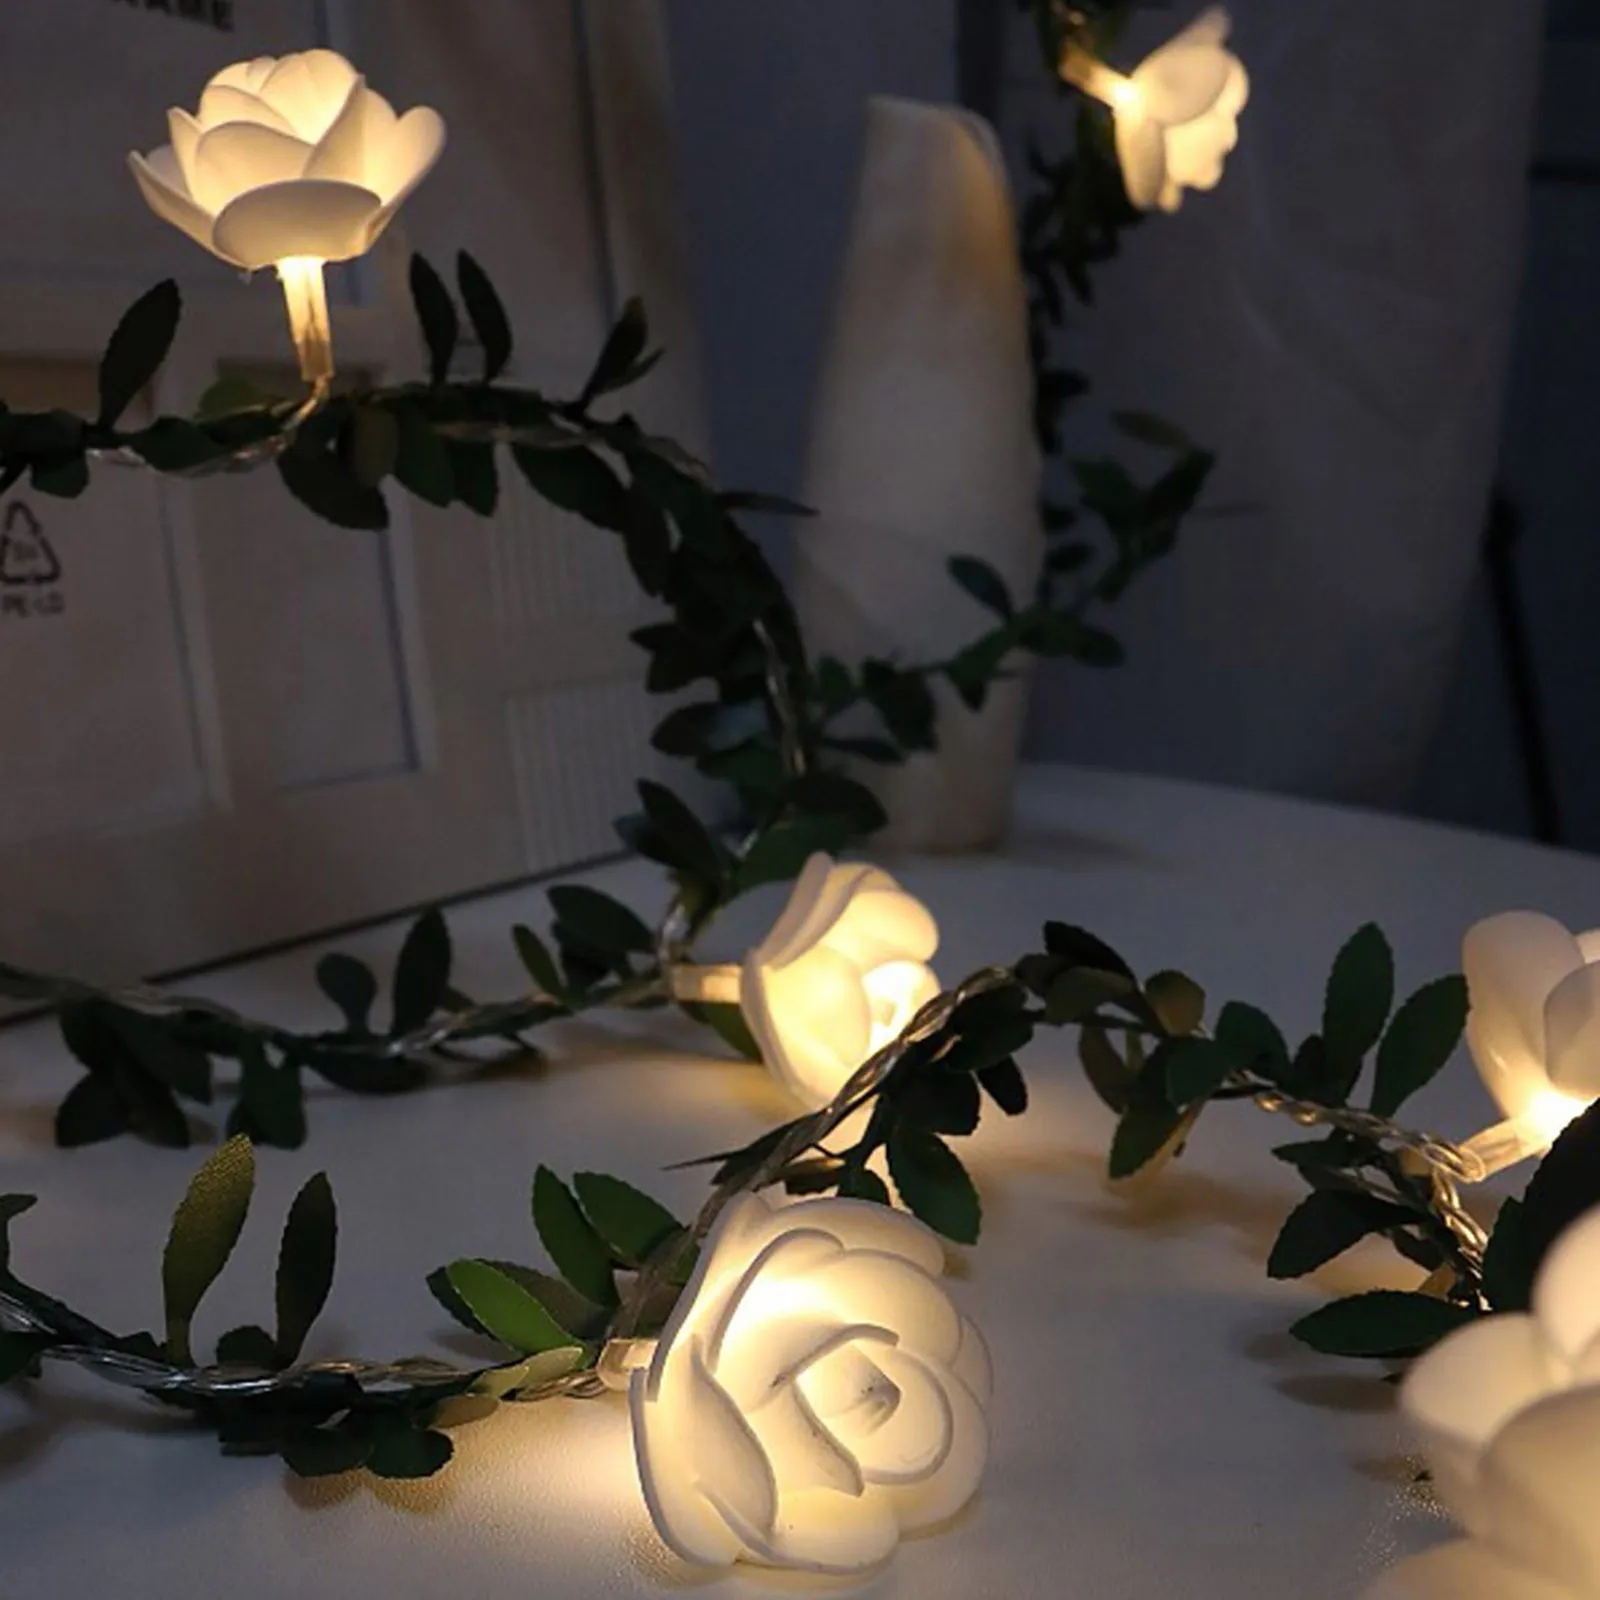 20 LED Rose Flower Warm White Fairy String Light Xmas Party Battery Operated SS 